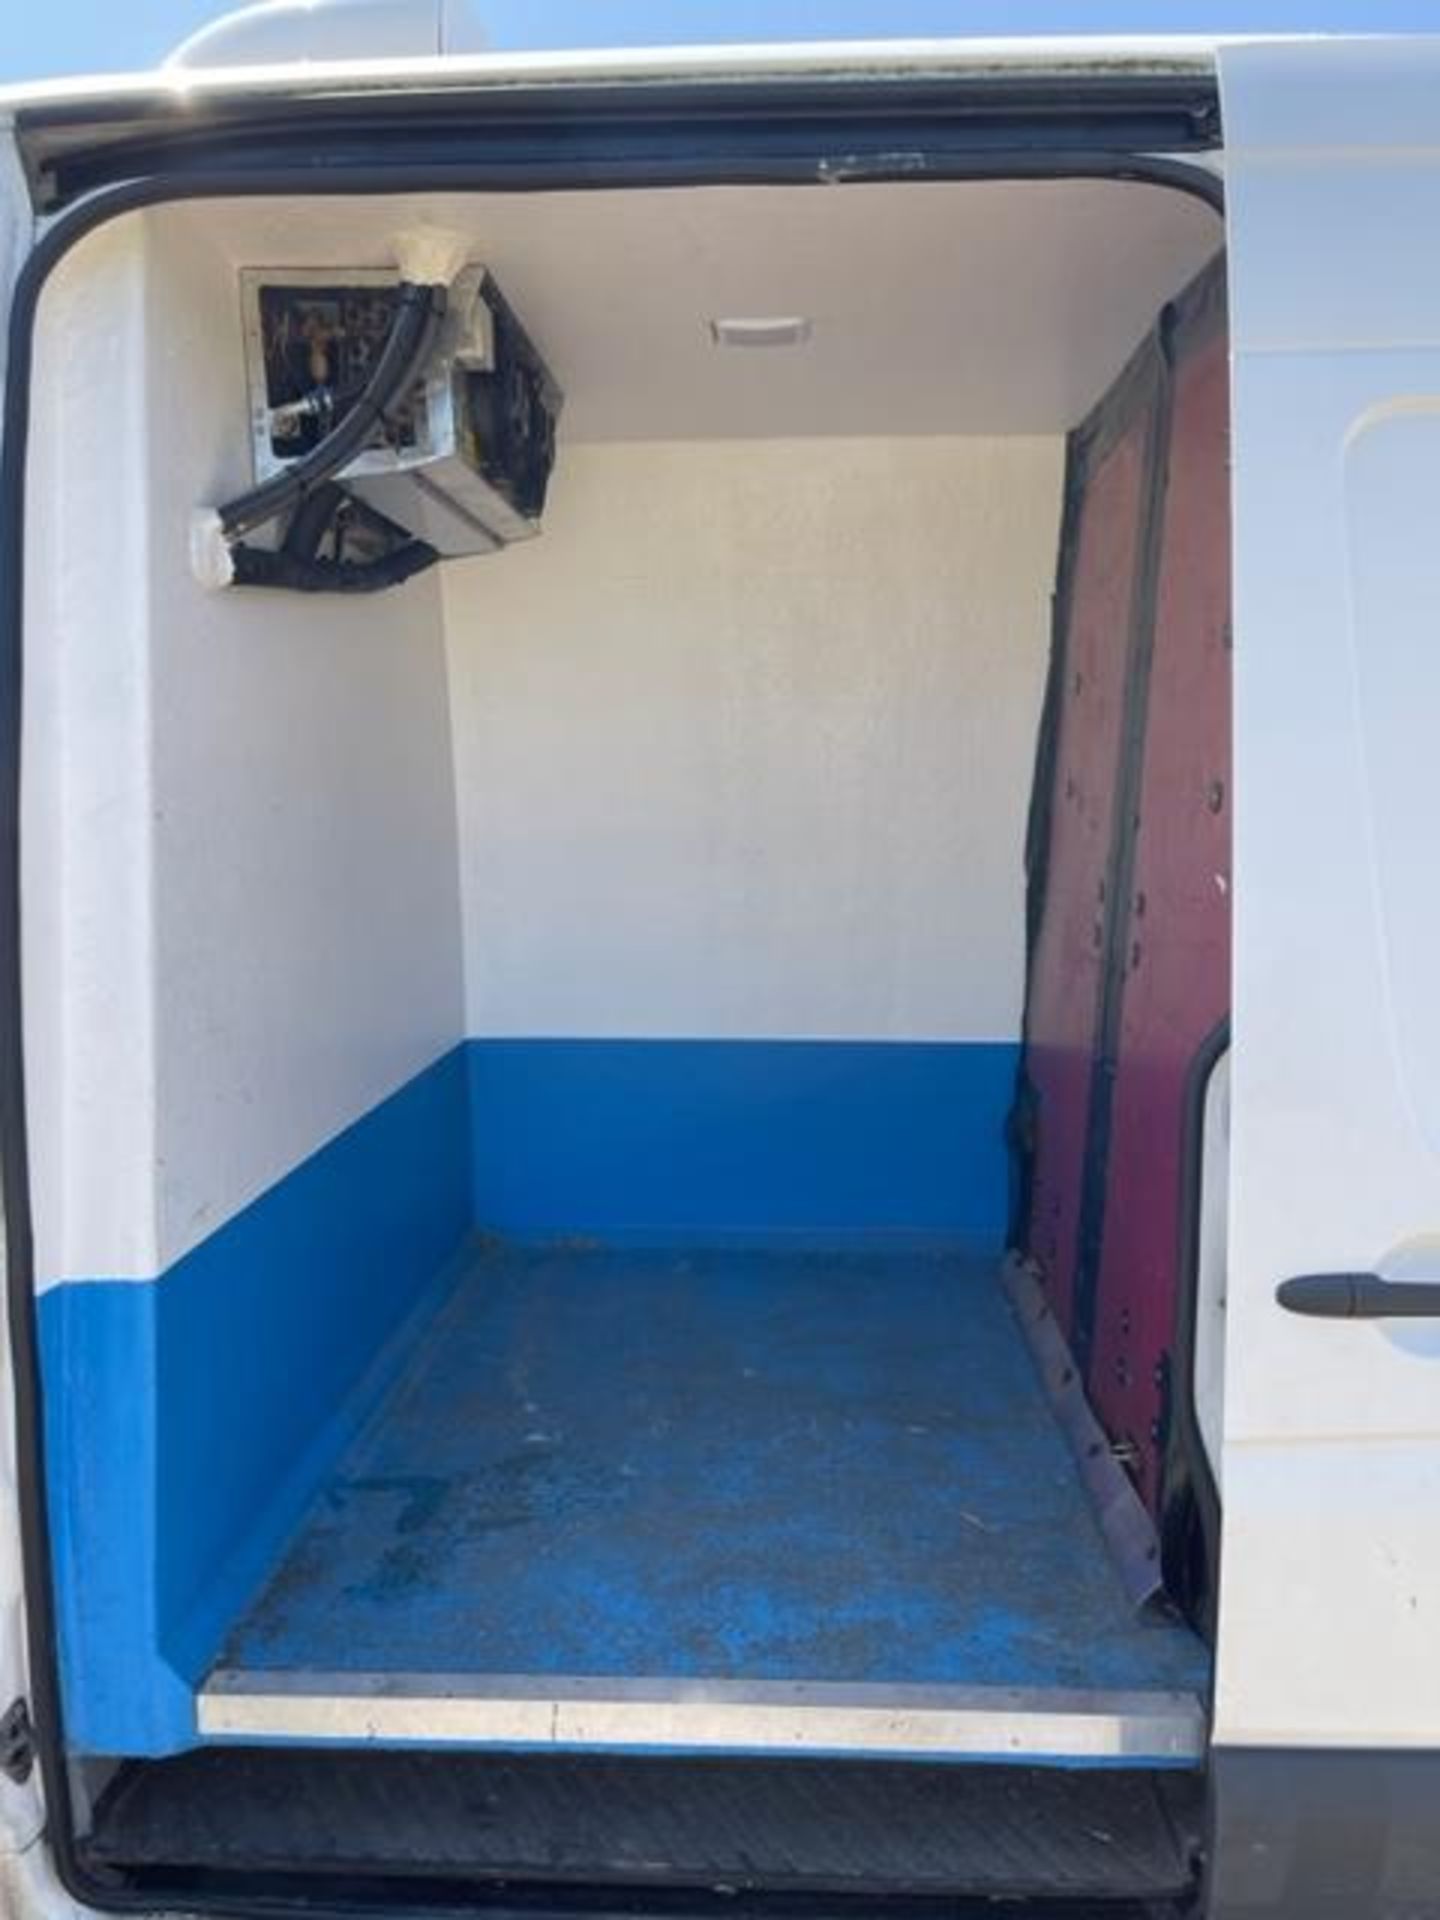 VW Crafter CR35 109 TDi refrigerated panel van, dual zone, fitted GAH compressor system - Image 7 of 13